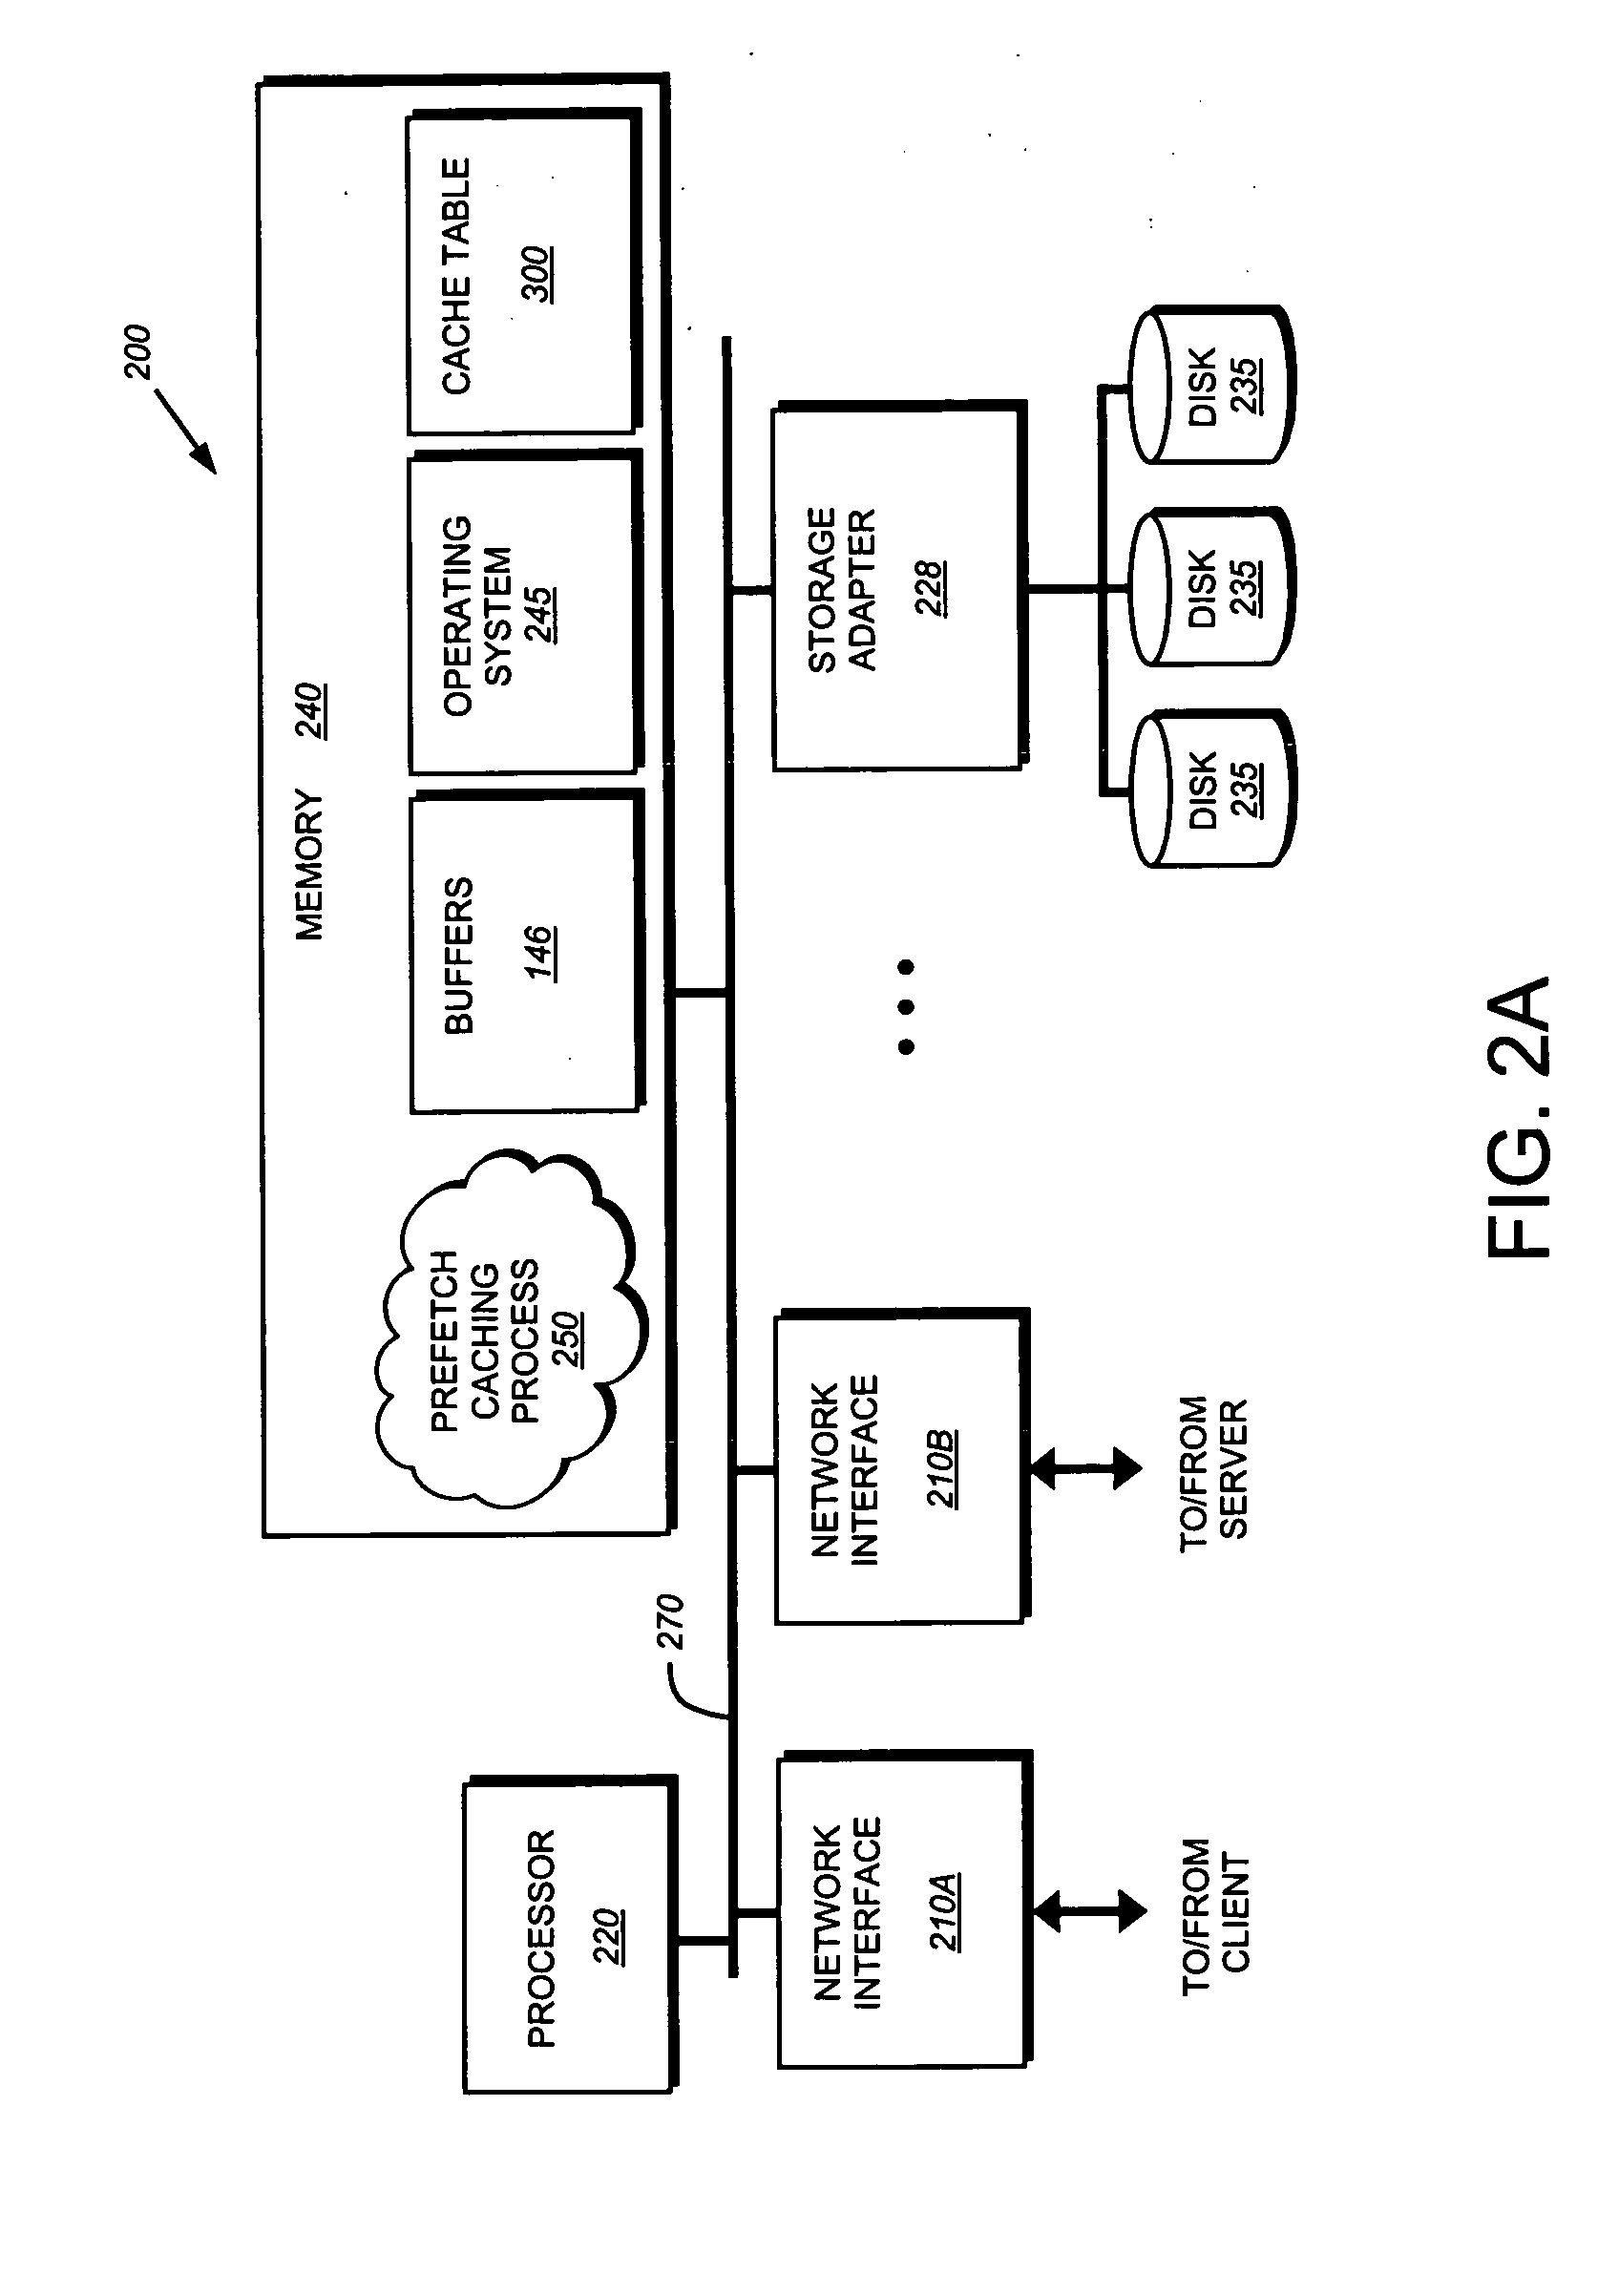 System and method for prefetching uncachable embedded objects